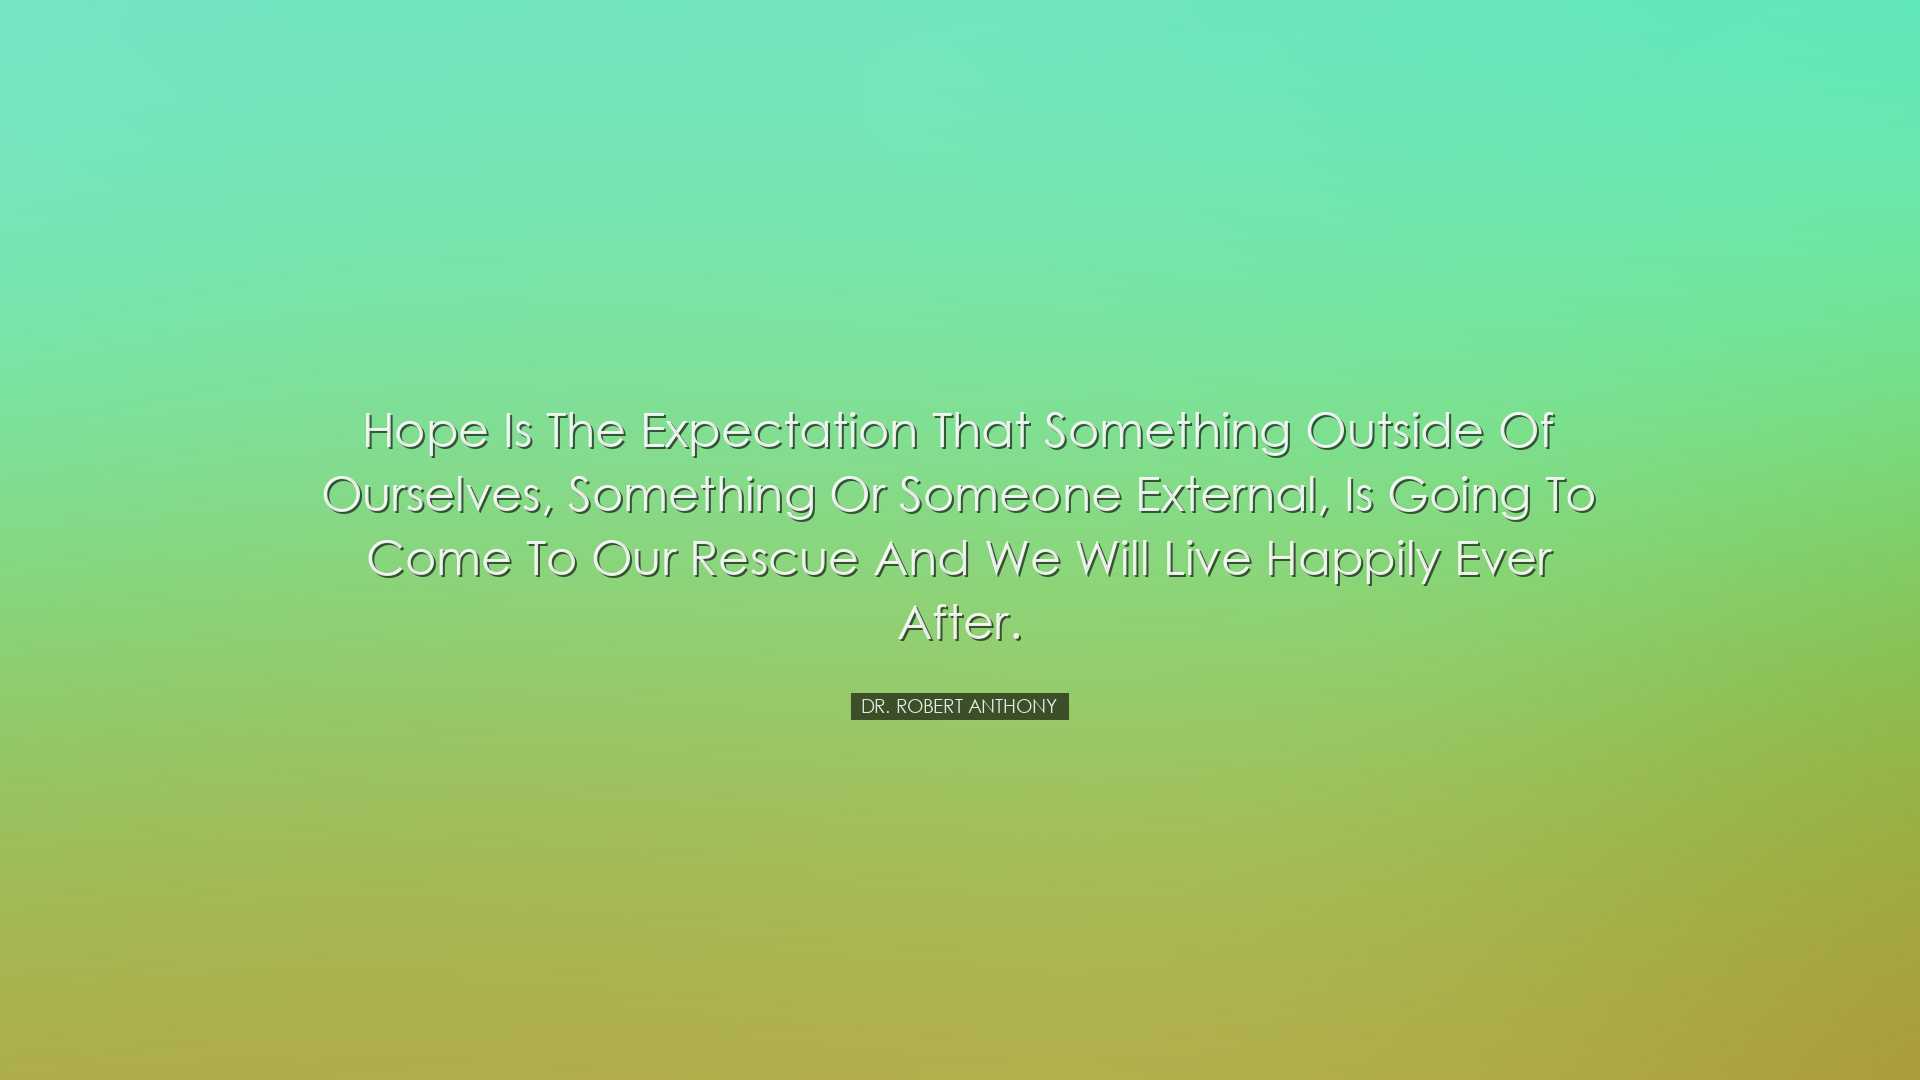 Hope is the expectation that something outside of ourselves, somet